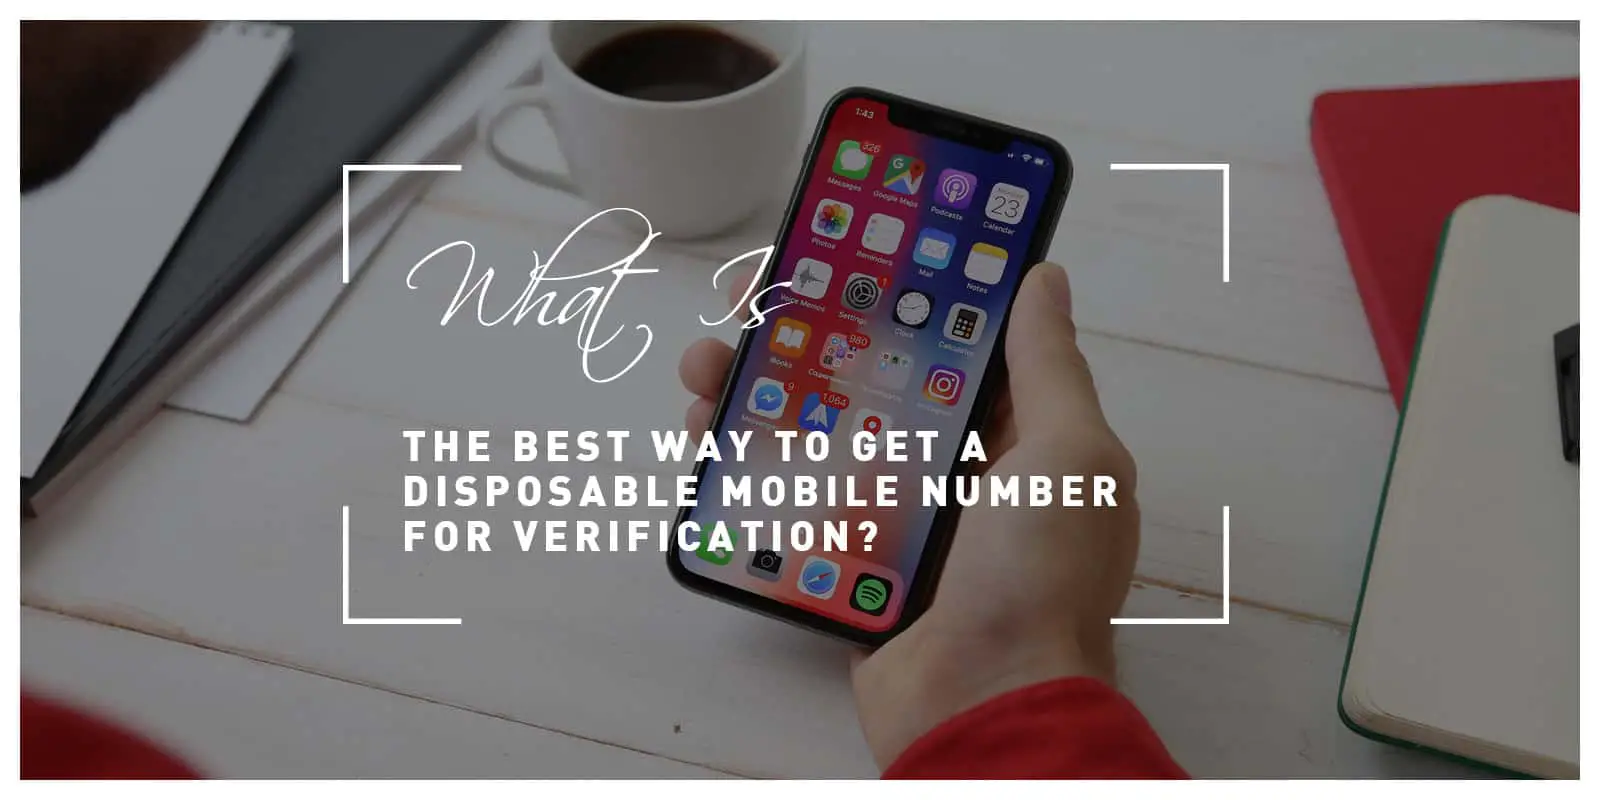 What Is the Best Way to Get a Disposable Mobile Number for Verification?